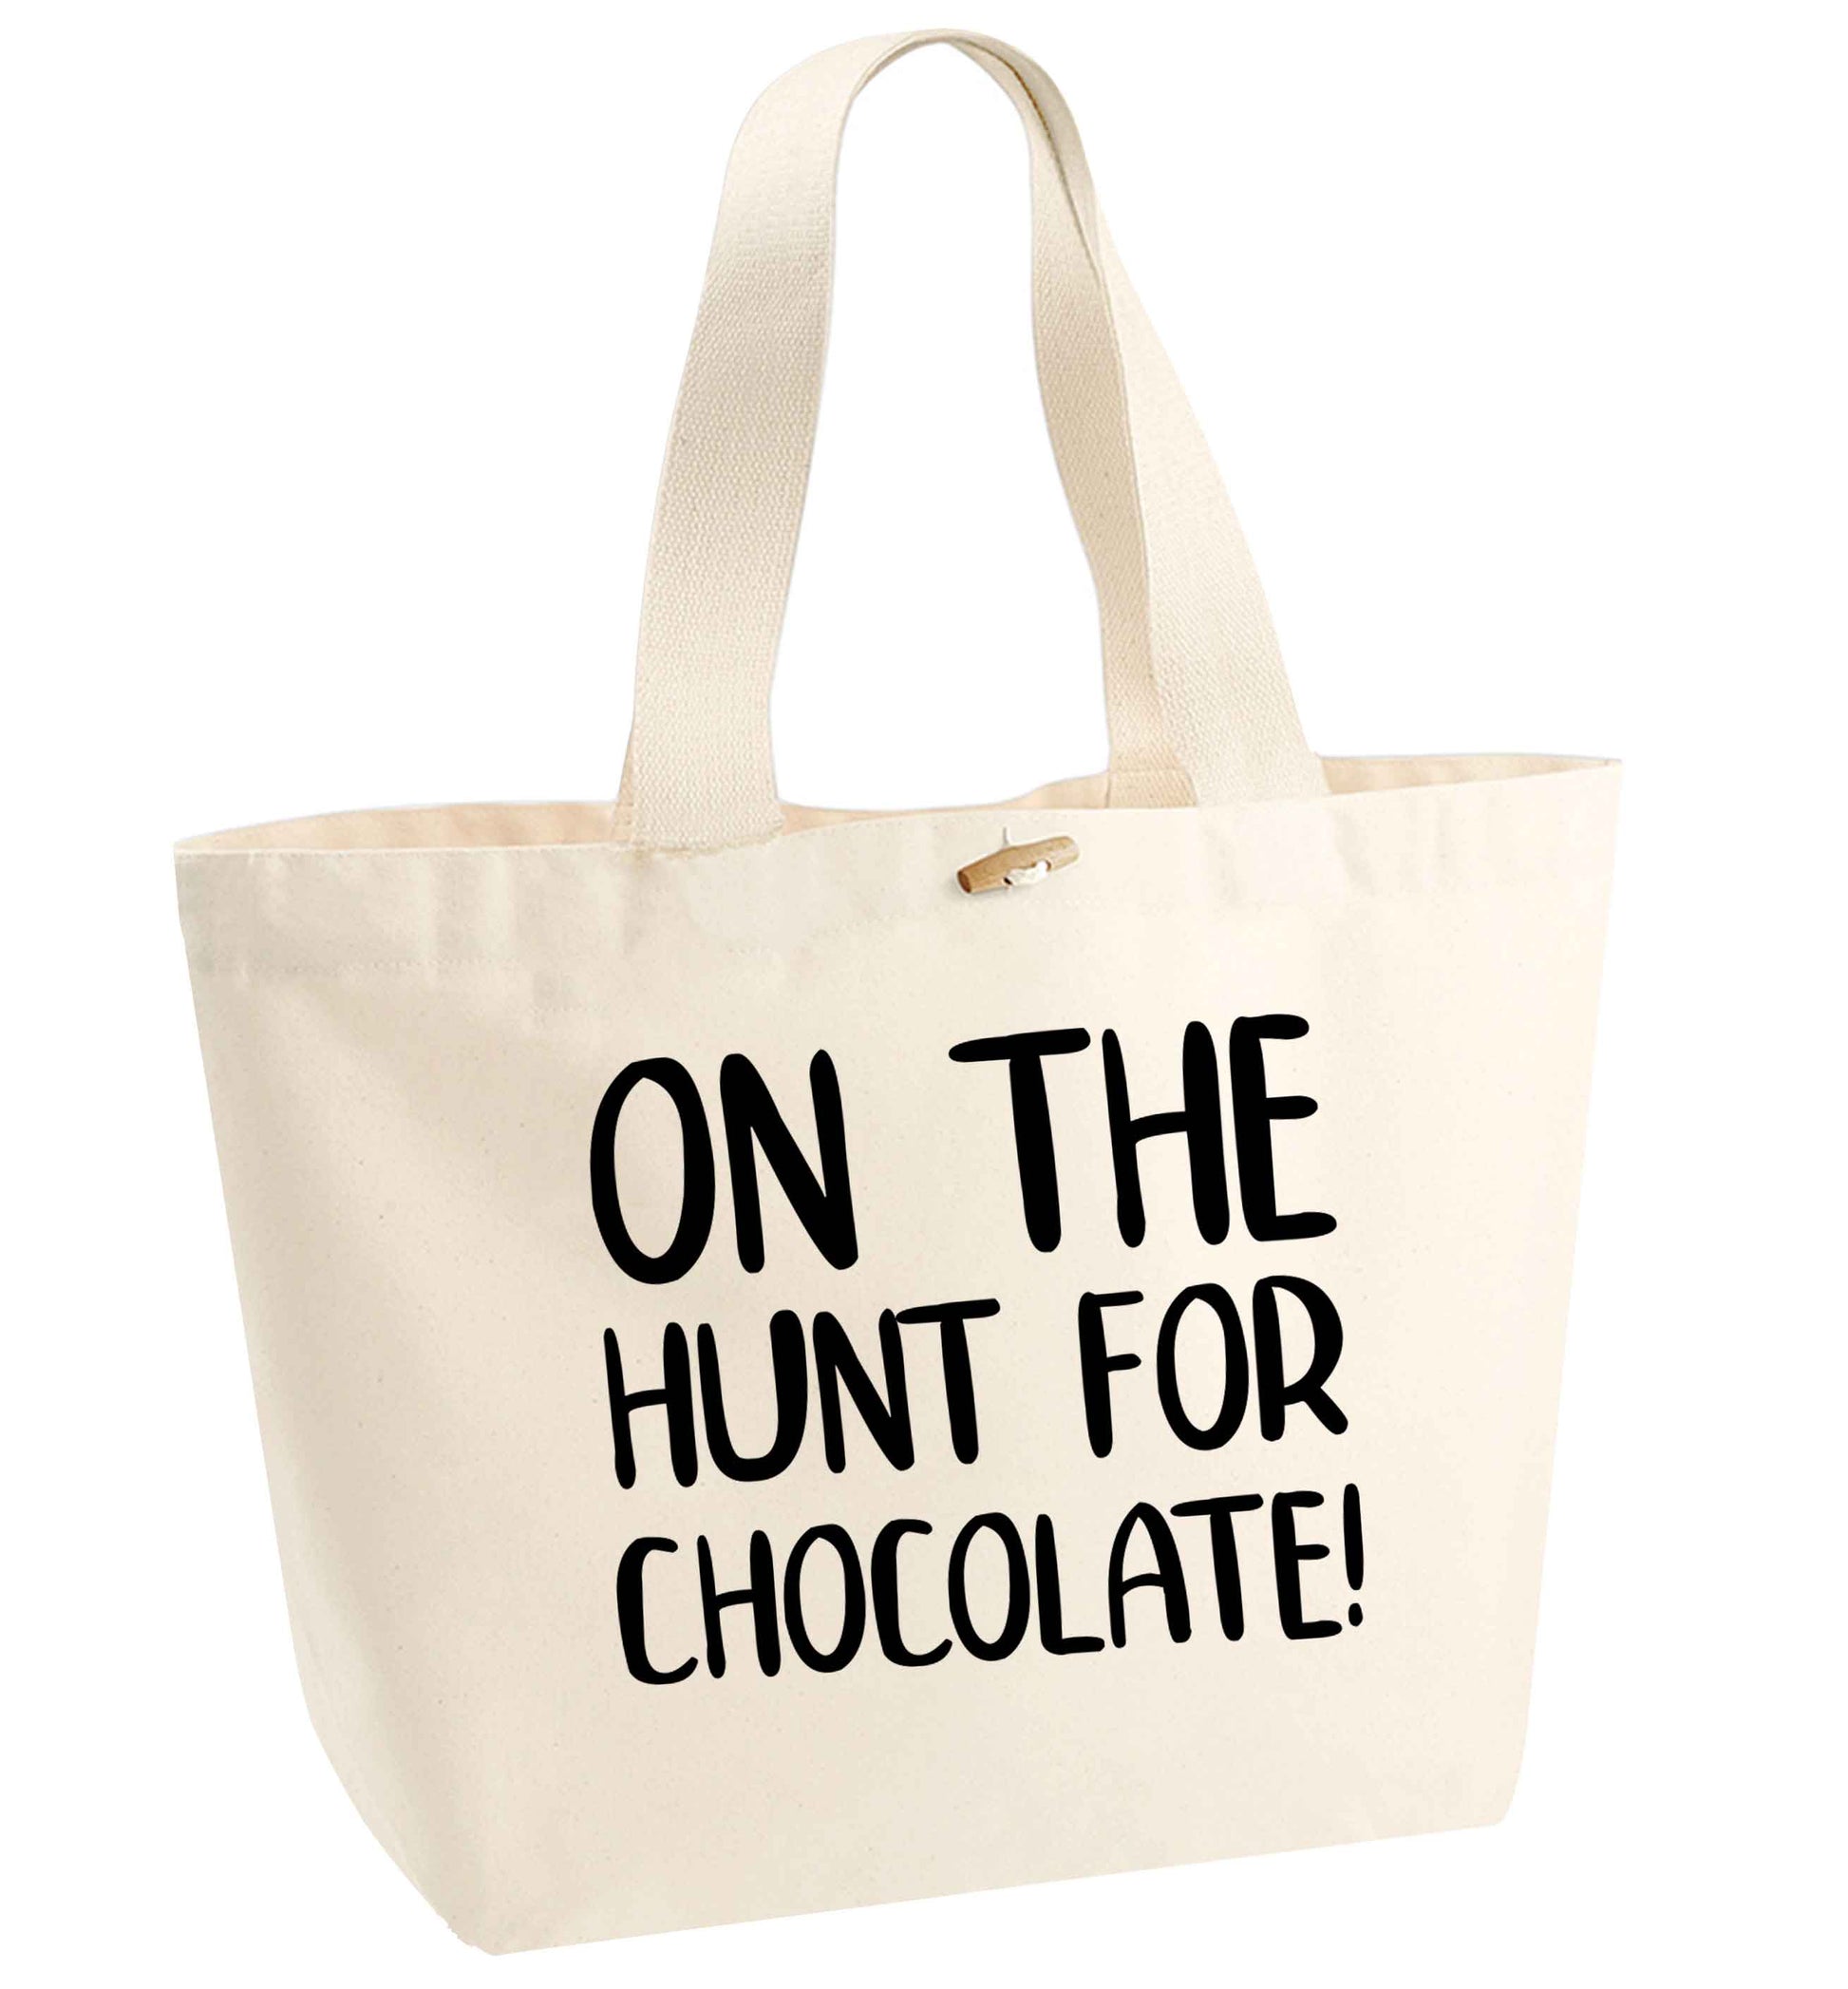 On the hunt for chocolate! organic cotton premium tote bag with wooden toggle in natural